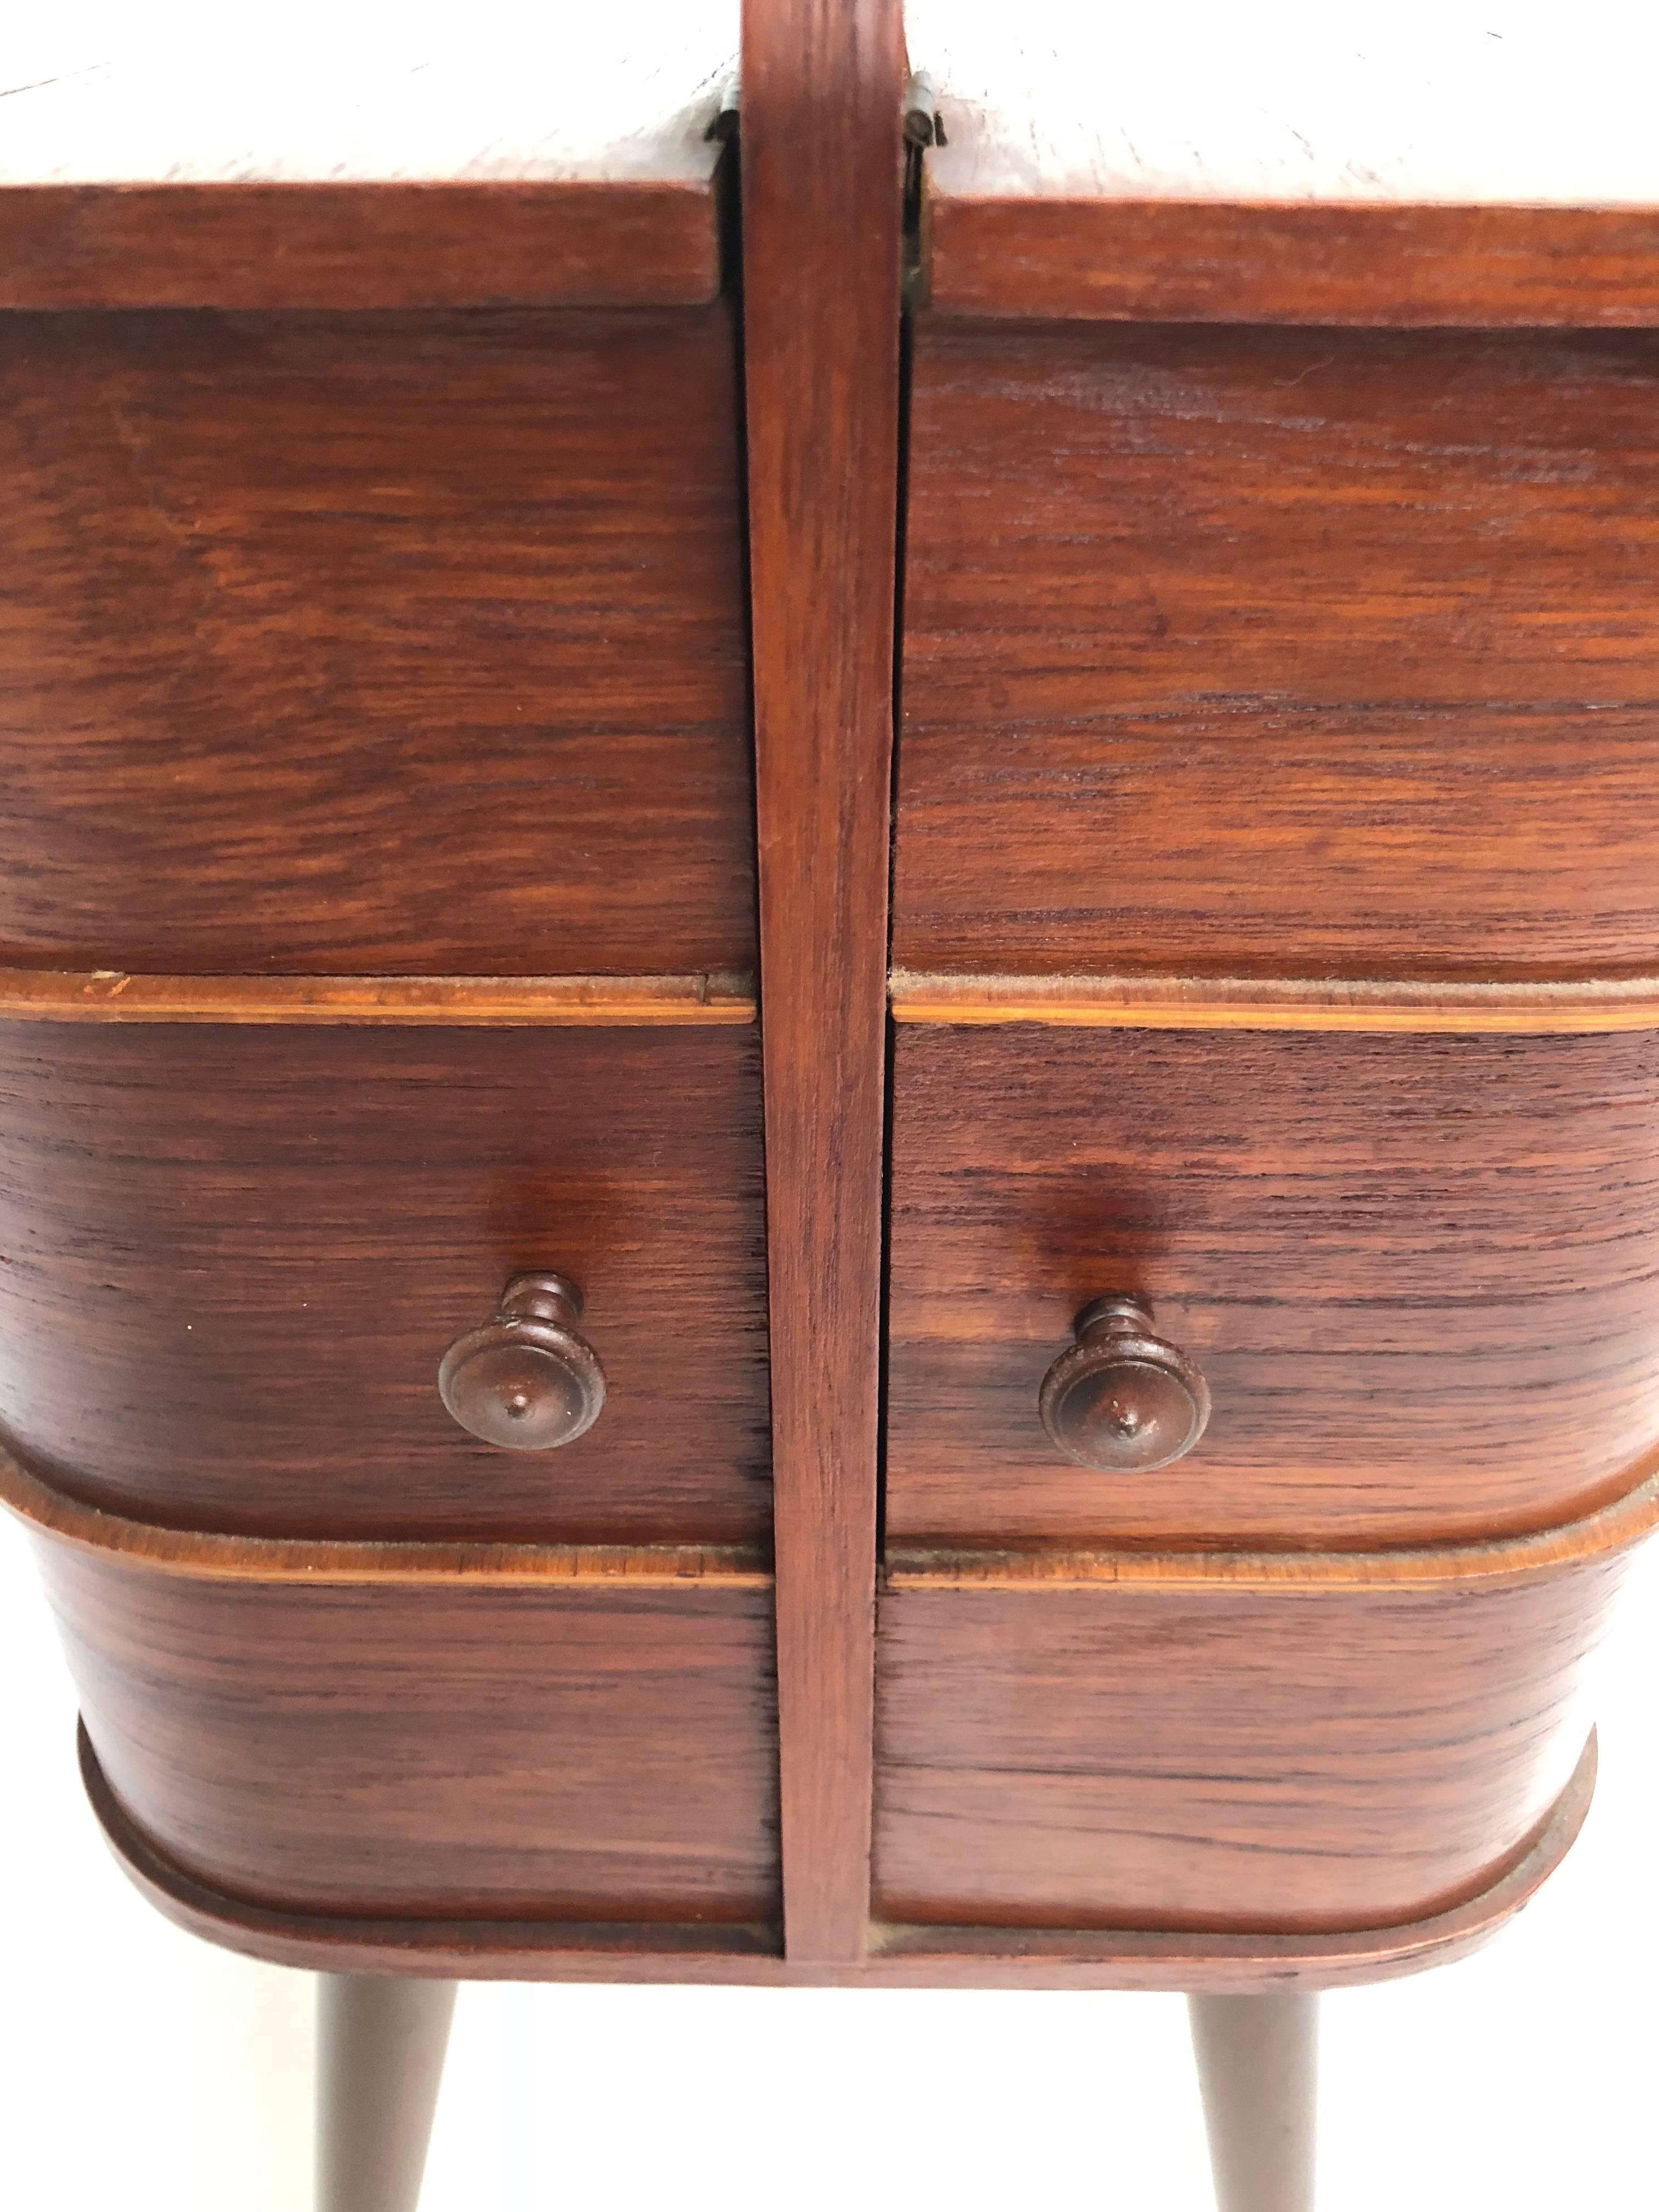 Mid-20th Century Adorable Danish Teak Plywood Sewing Box Distributed by Pastoe in the 1950s